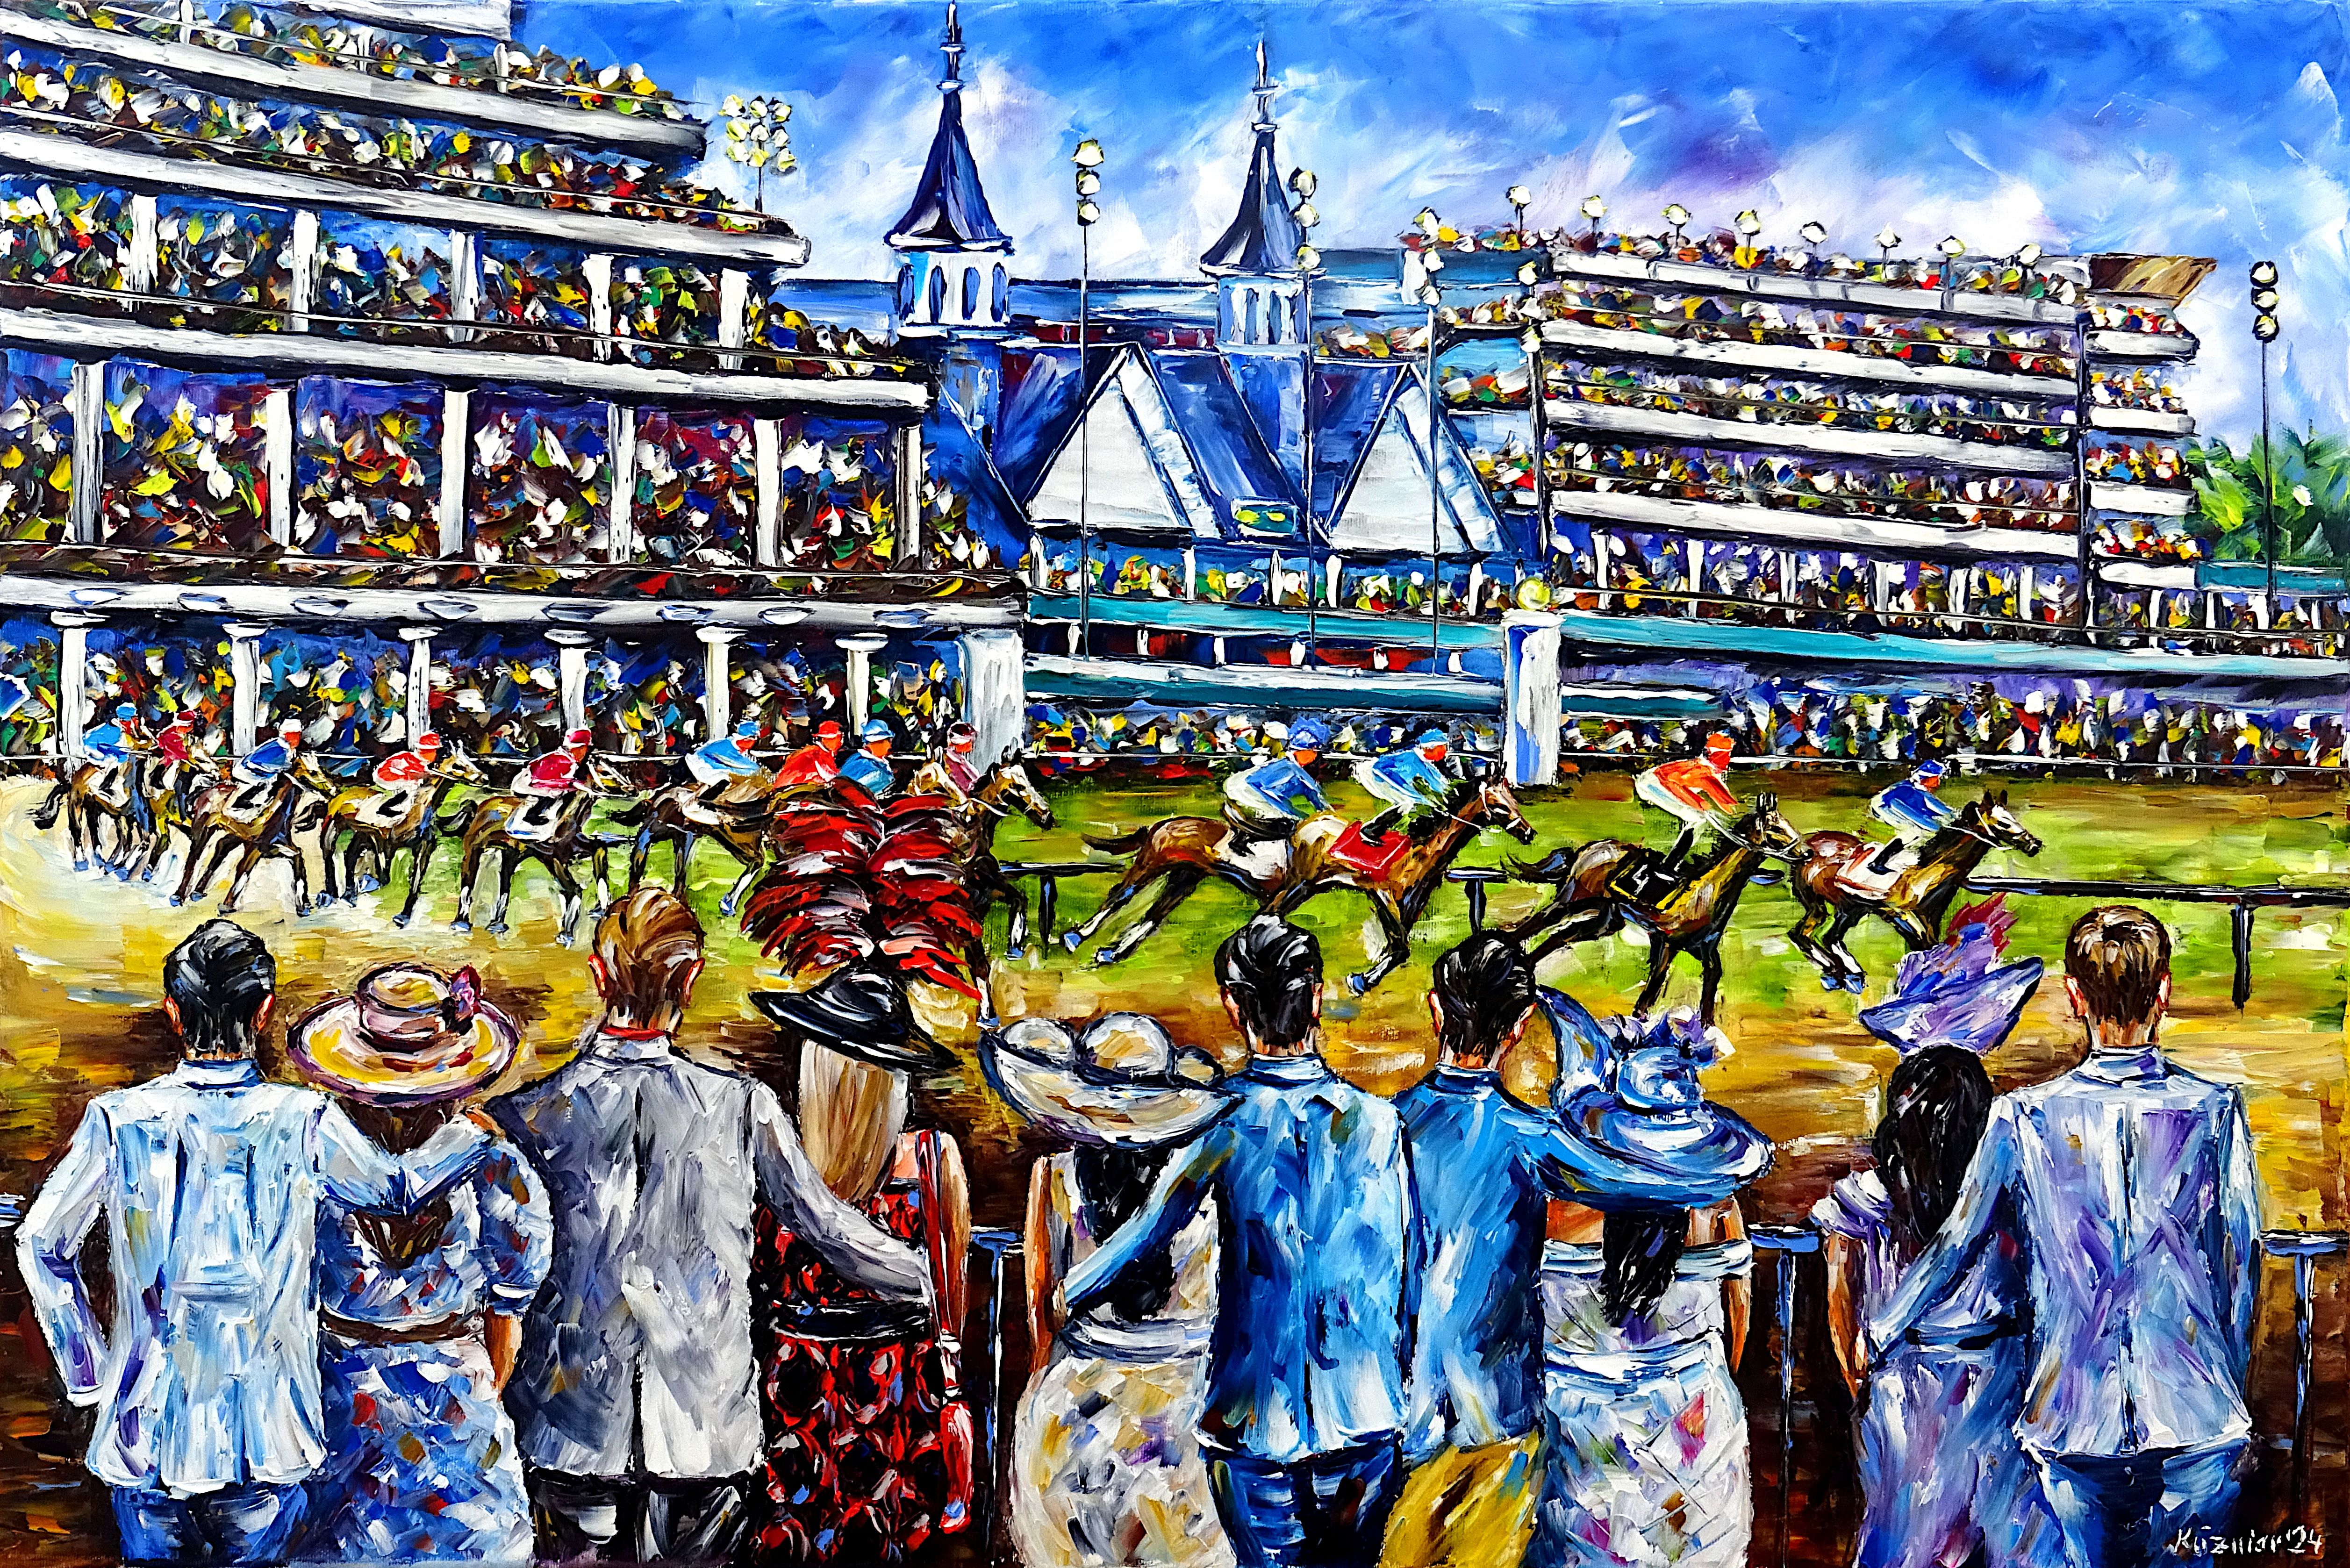 kentucky derby,horse racing,equestrian sport,jockeys,horse racing in kentucky,people at horse racing,horses,horse derby,riding,riders,love of horses,horse lovers,I love horses,horse painting,horse picture,sport,sport painting,love of sports,sportsmen,sports lovers,palette knife oil painting,expressive art,expressive painting,expressionism,lively colors,colorful painting,impasto painting,figurative